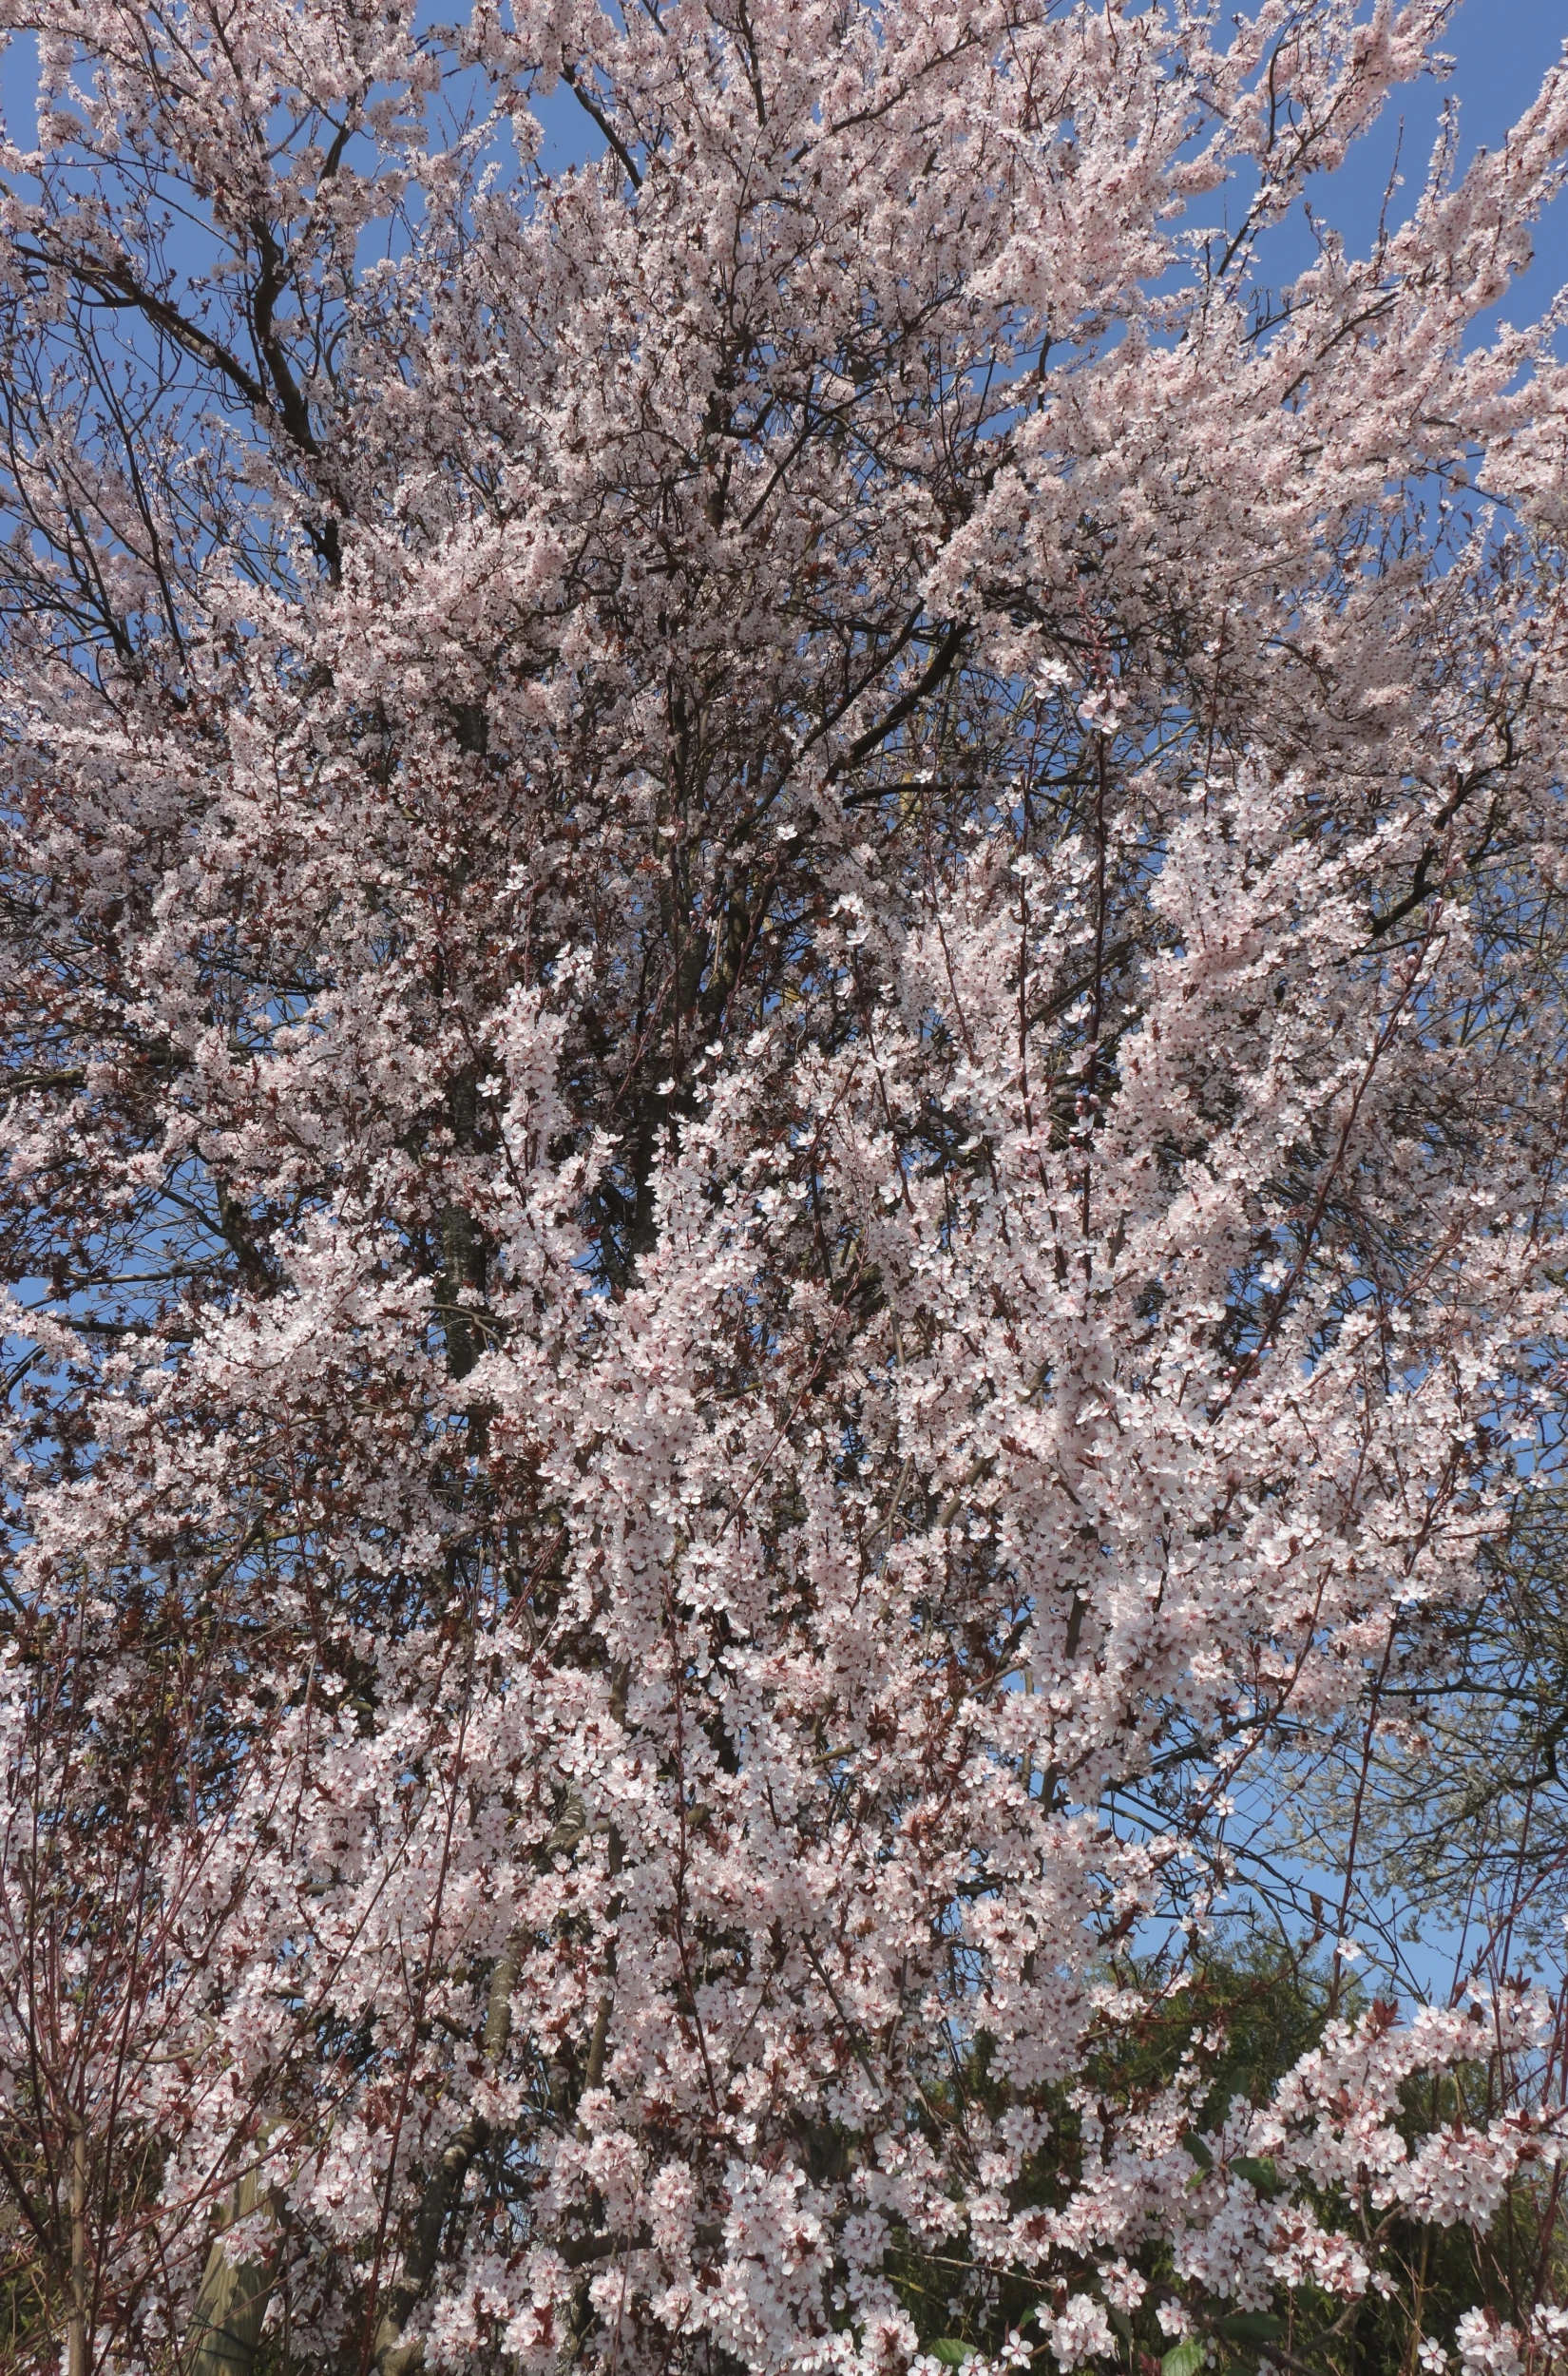 Blood plum - pink coloured flowers on a tree. They have a similar structure to the cherry plum. The branches protrude upwards from the trunk. The background is a blue sky.